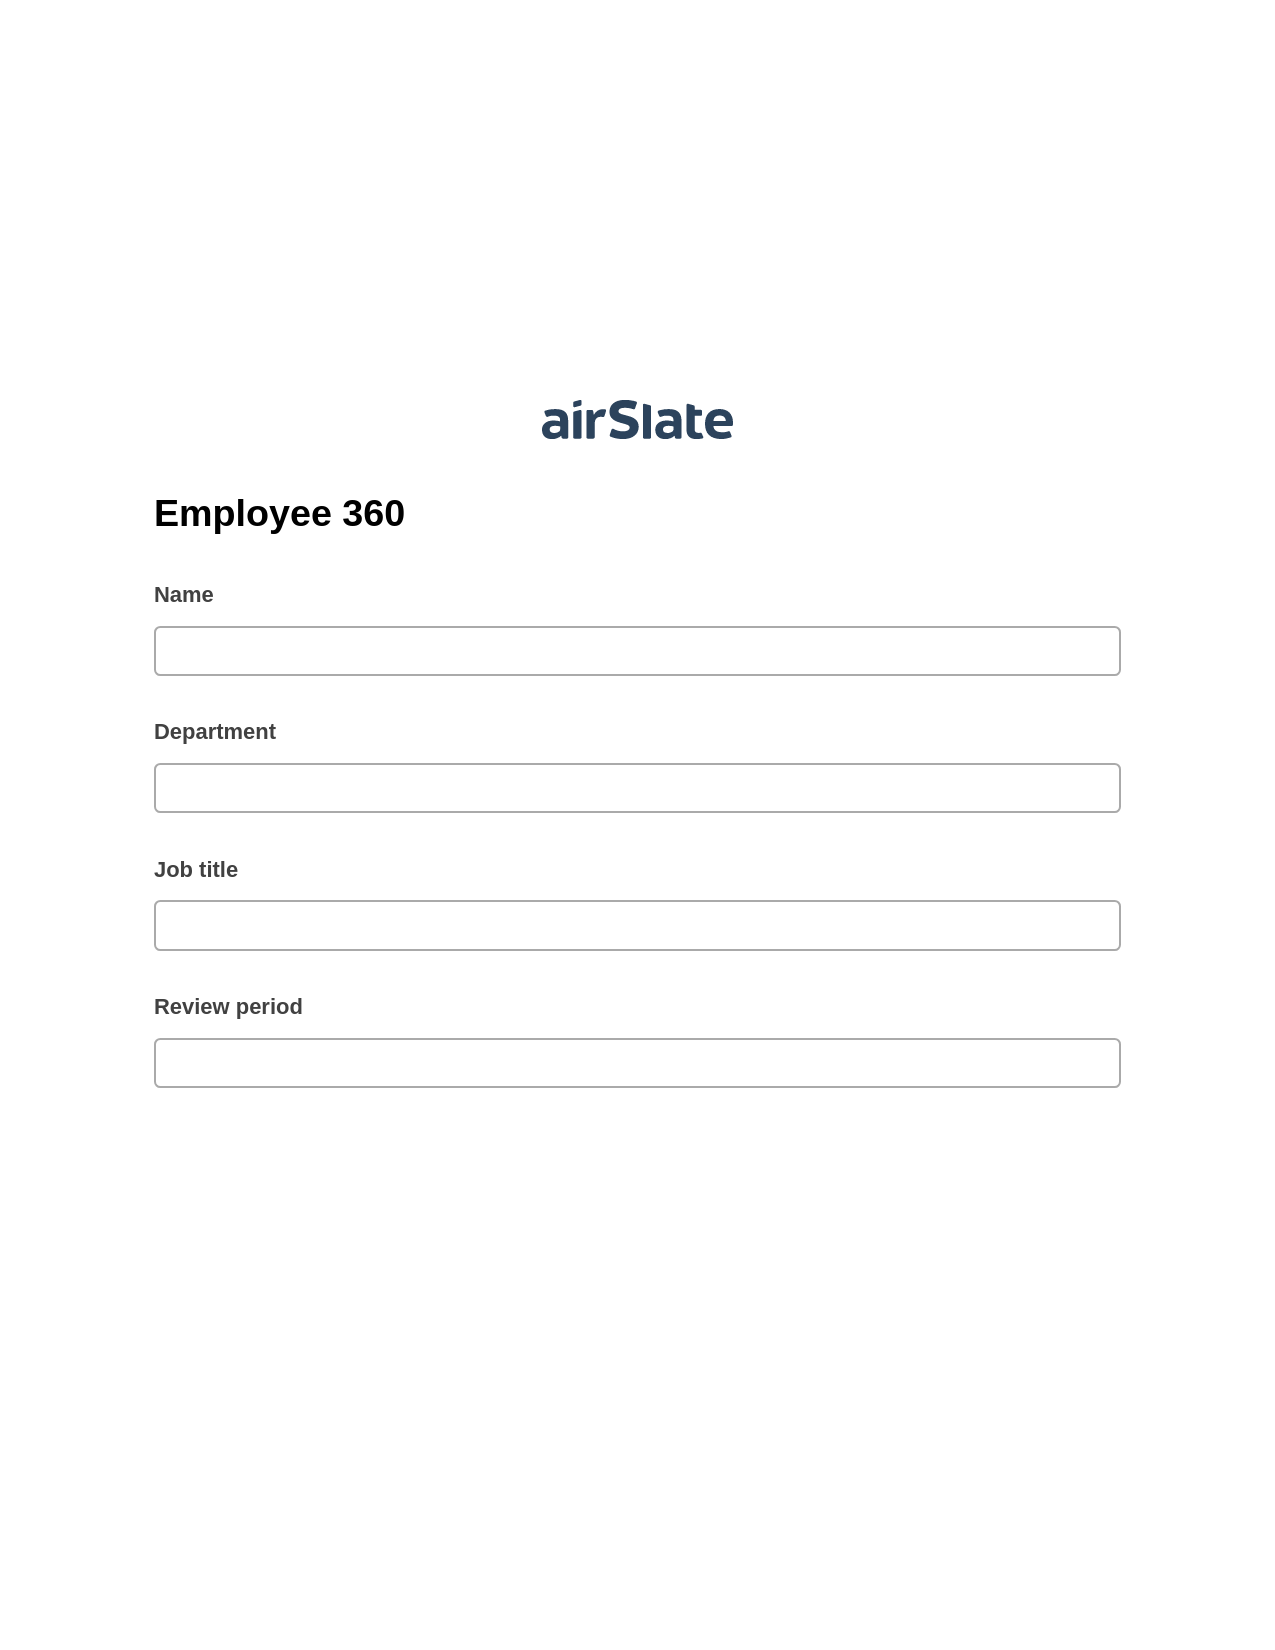 Employee 360 Pre-fill Dropdowns from MySQL Bot, Export to MS Dynamics 365 Bot, Export to Excel 365 Bot